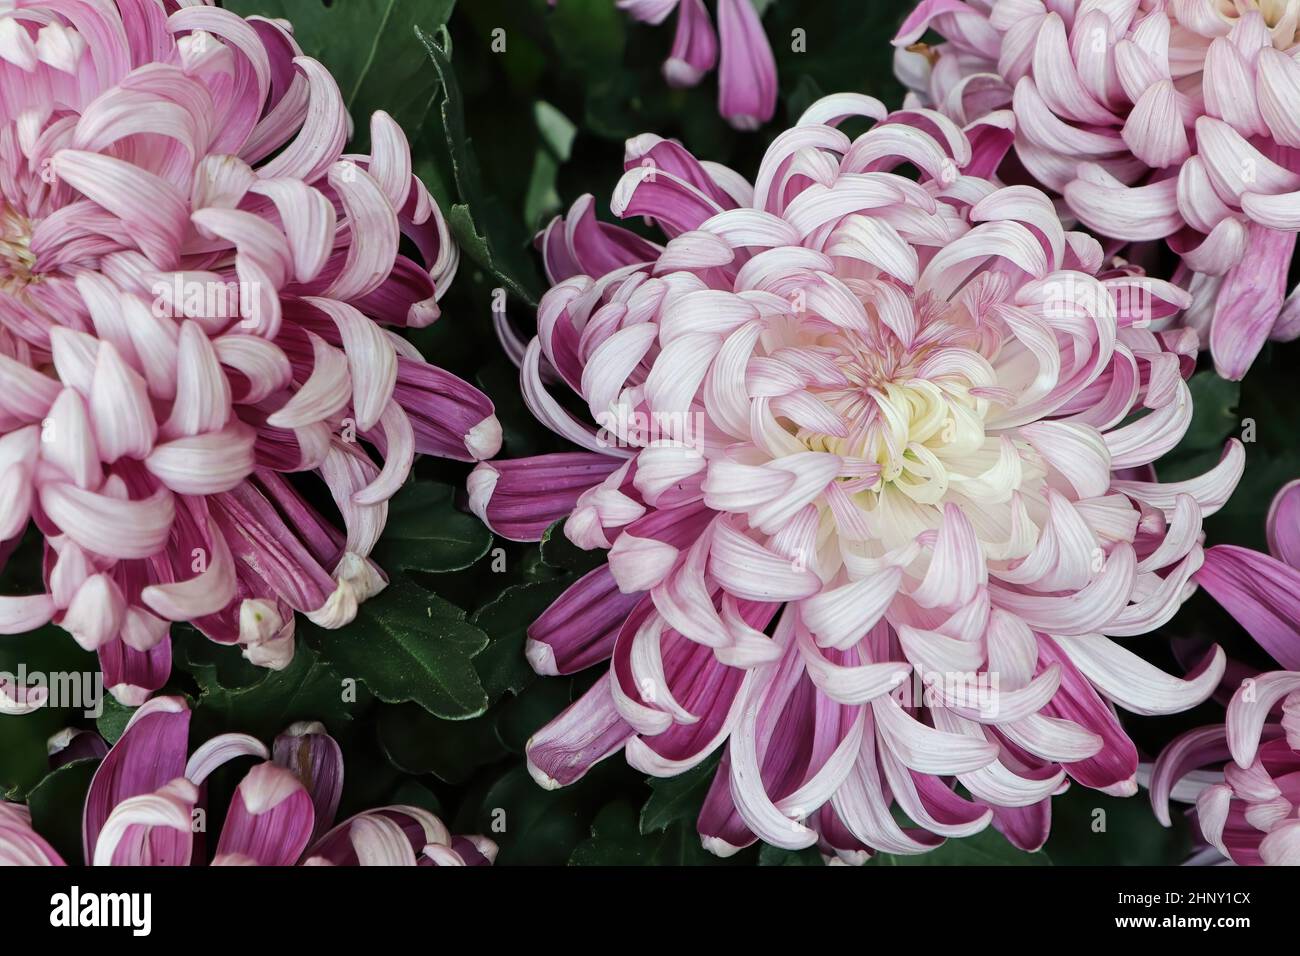 Background of pink and white shades on a spider mum. Stock Photo